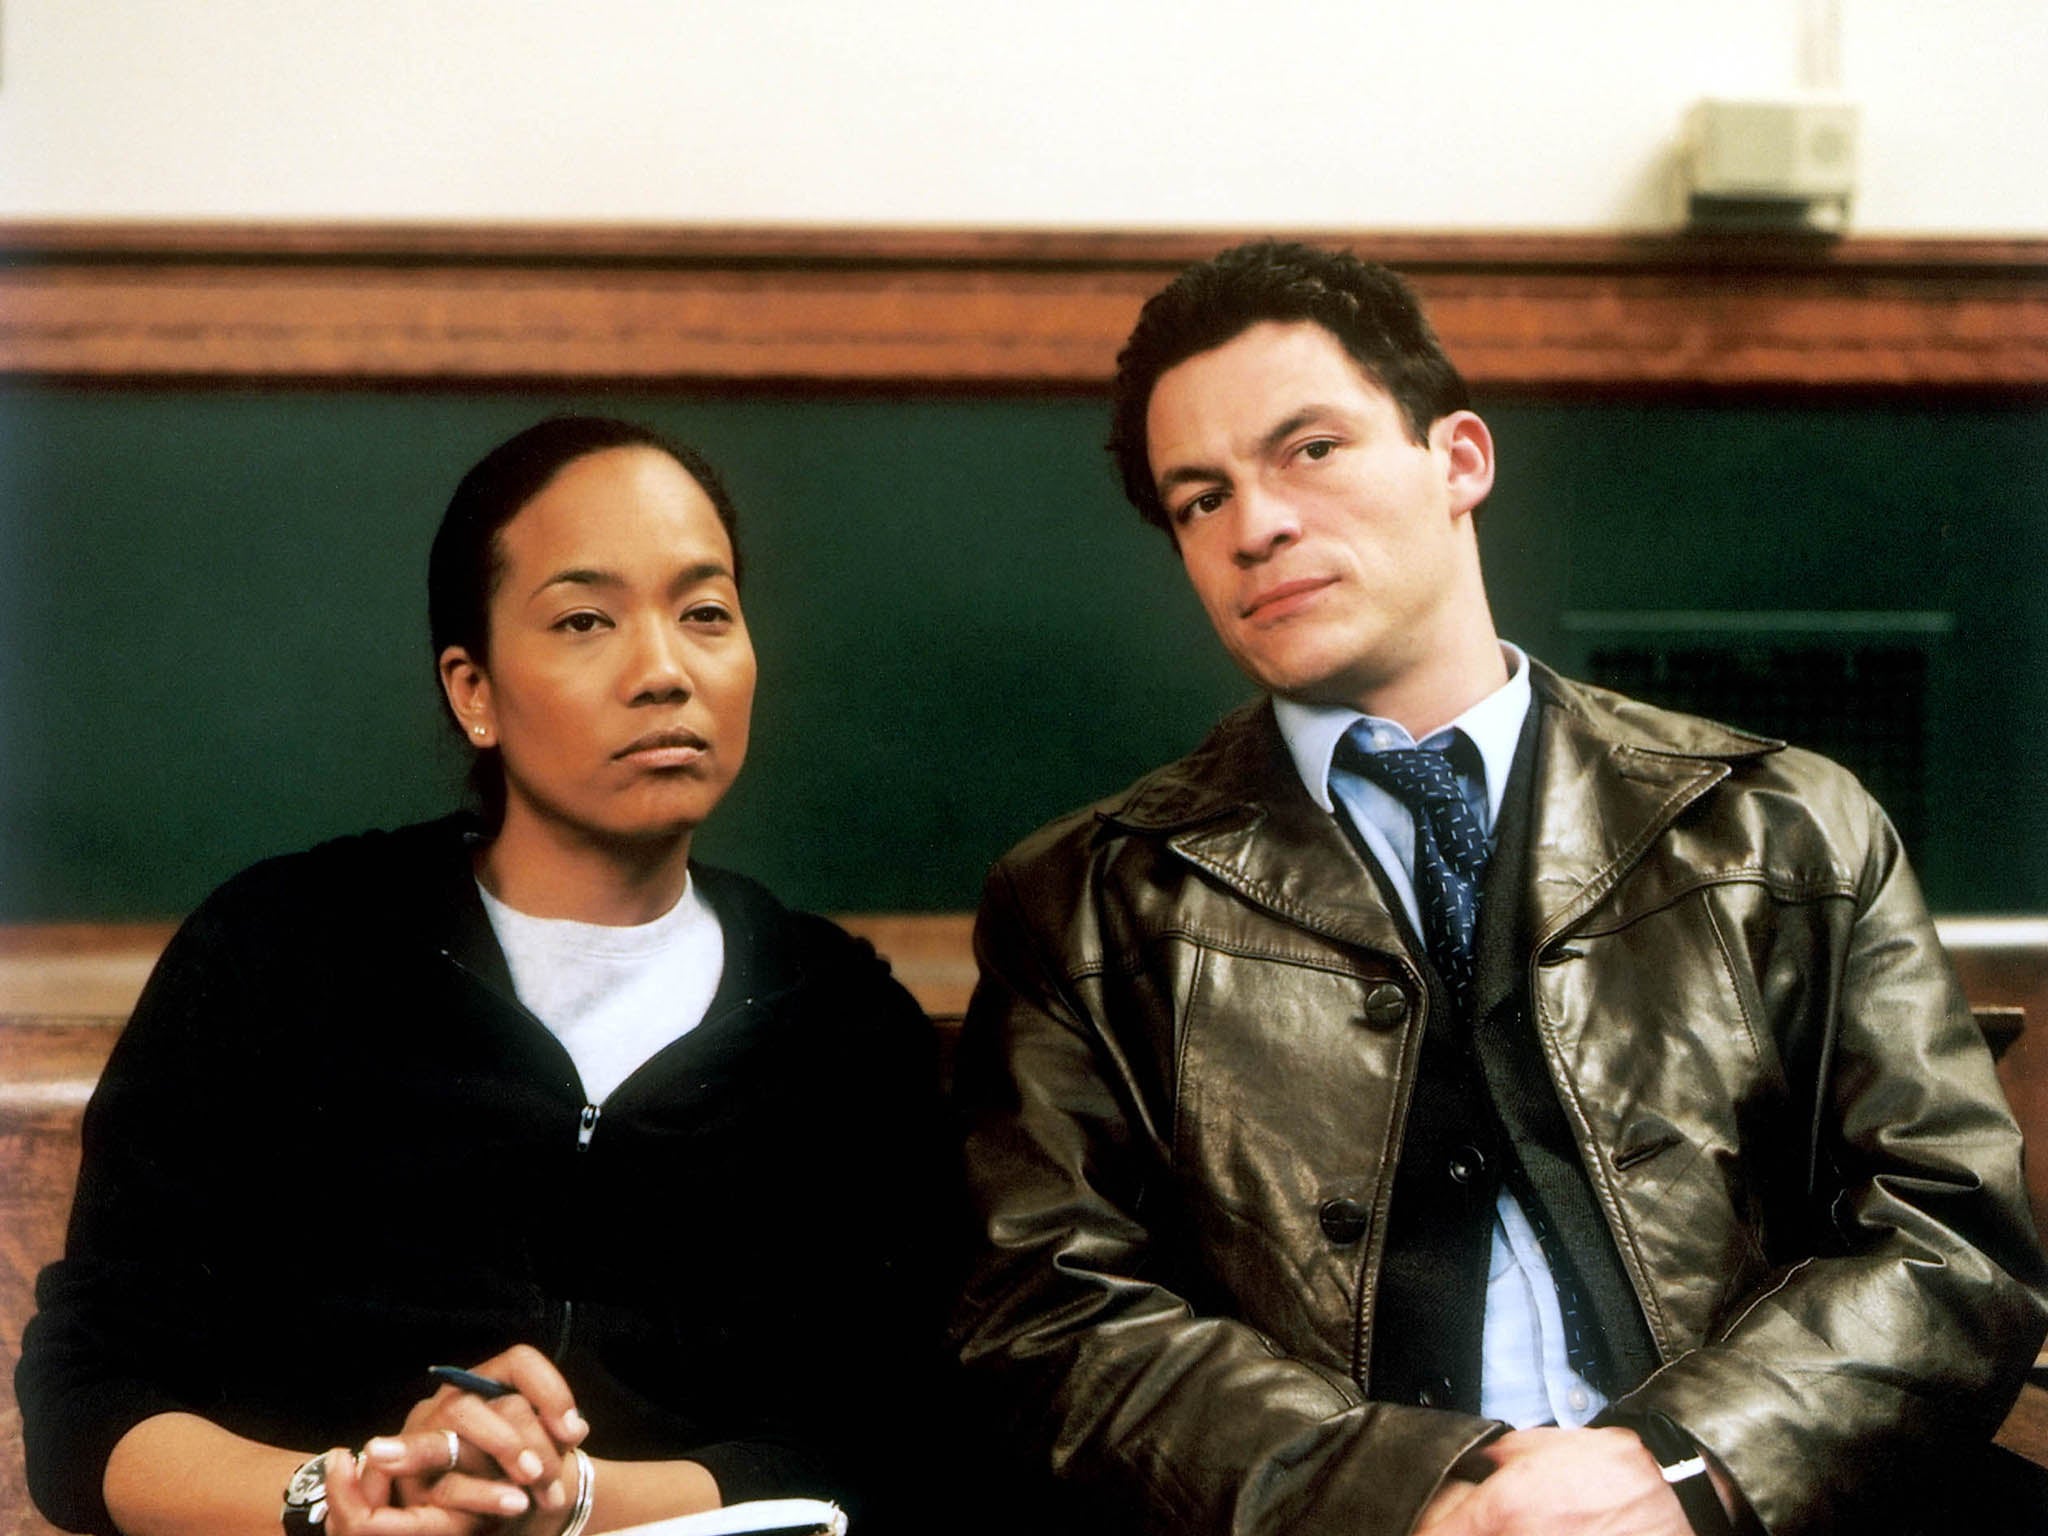 The Wire at 20: Every episode ranked, from serial killer shark